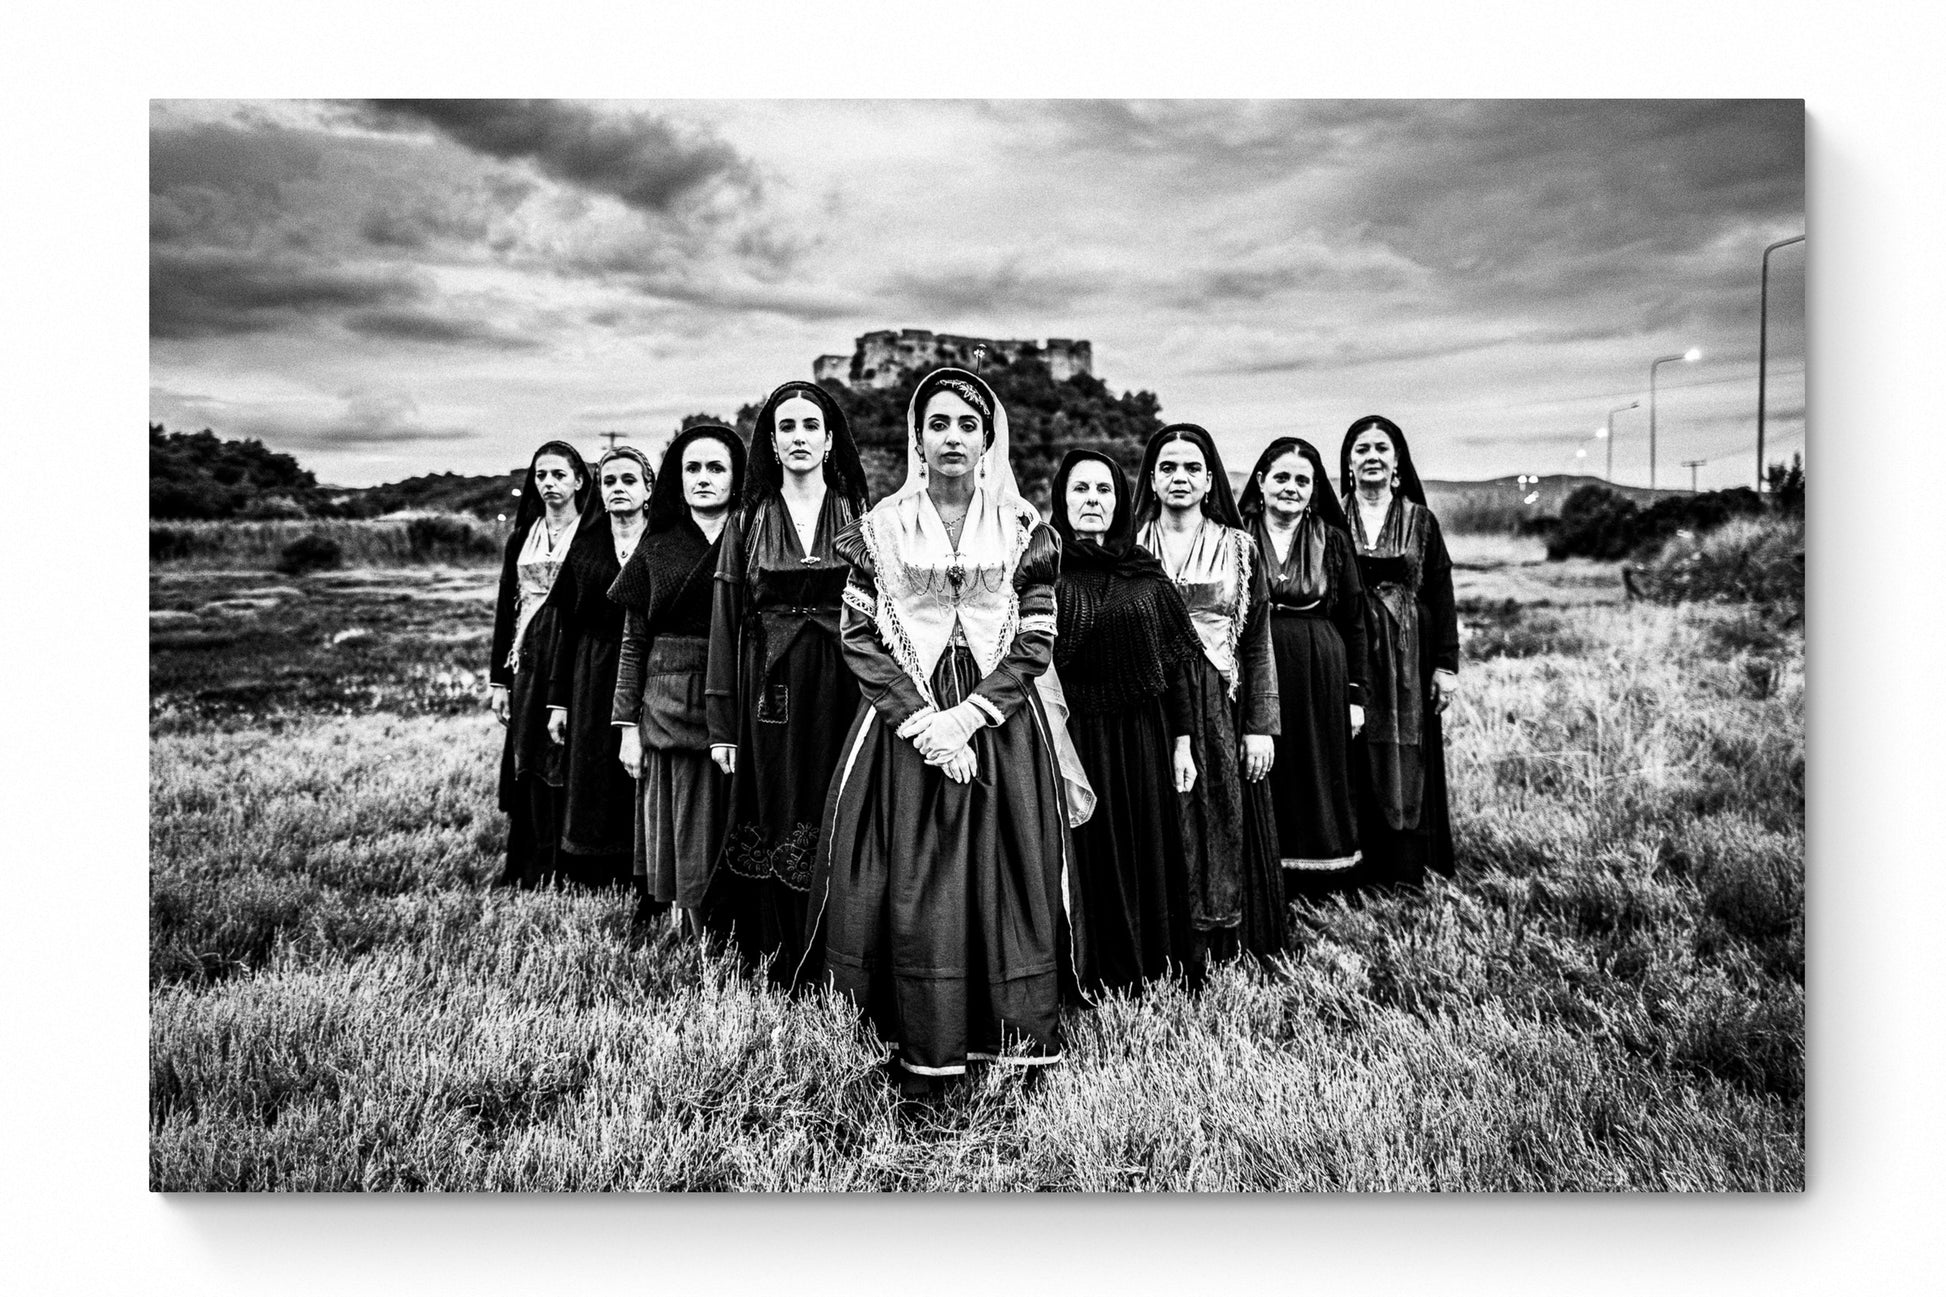 Black and White Photography Wall Art Greece | Costumes of Lefkada island at a castle multiple generations Ionian Sea by George Tatakis - whole photo